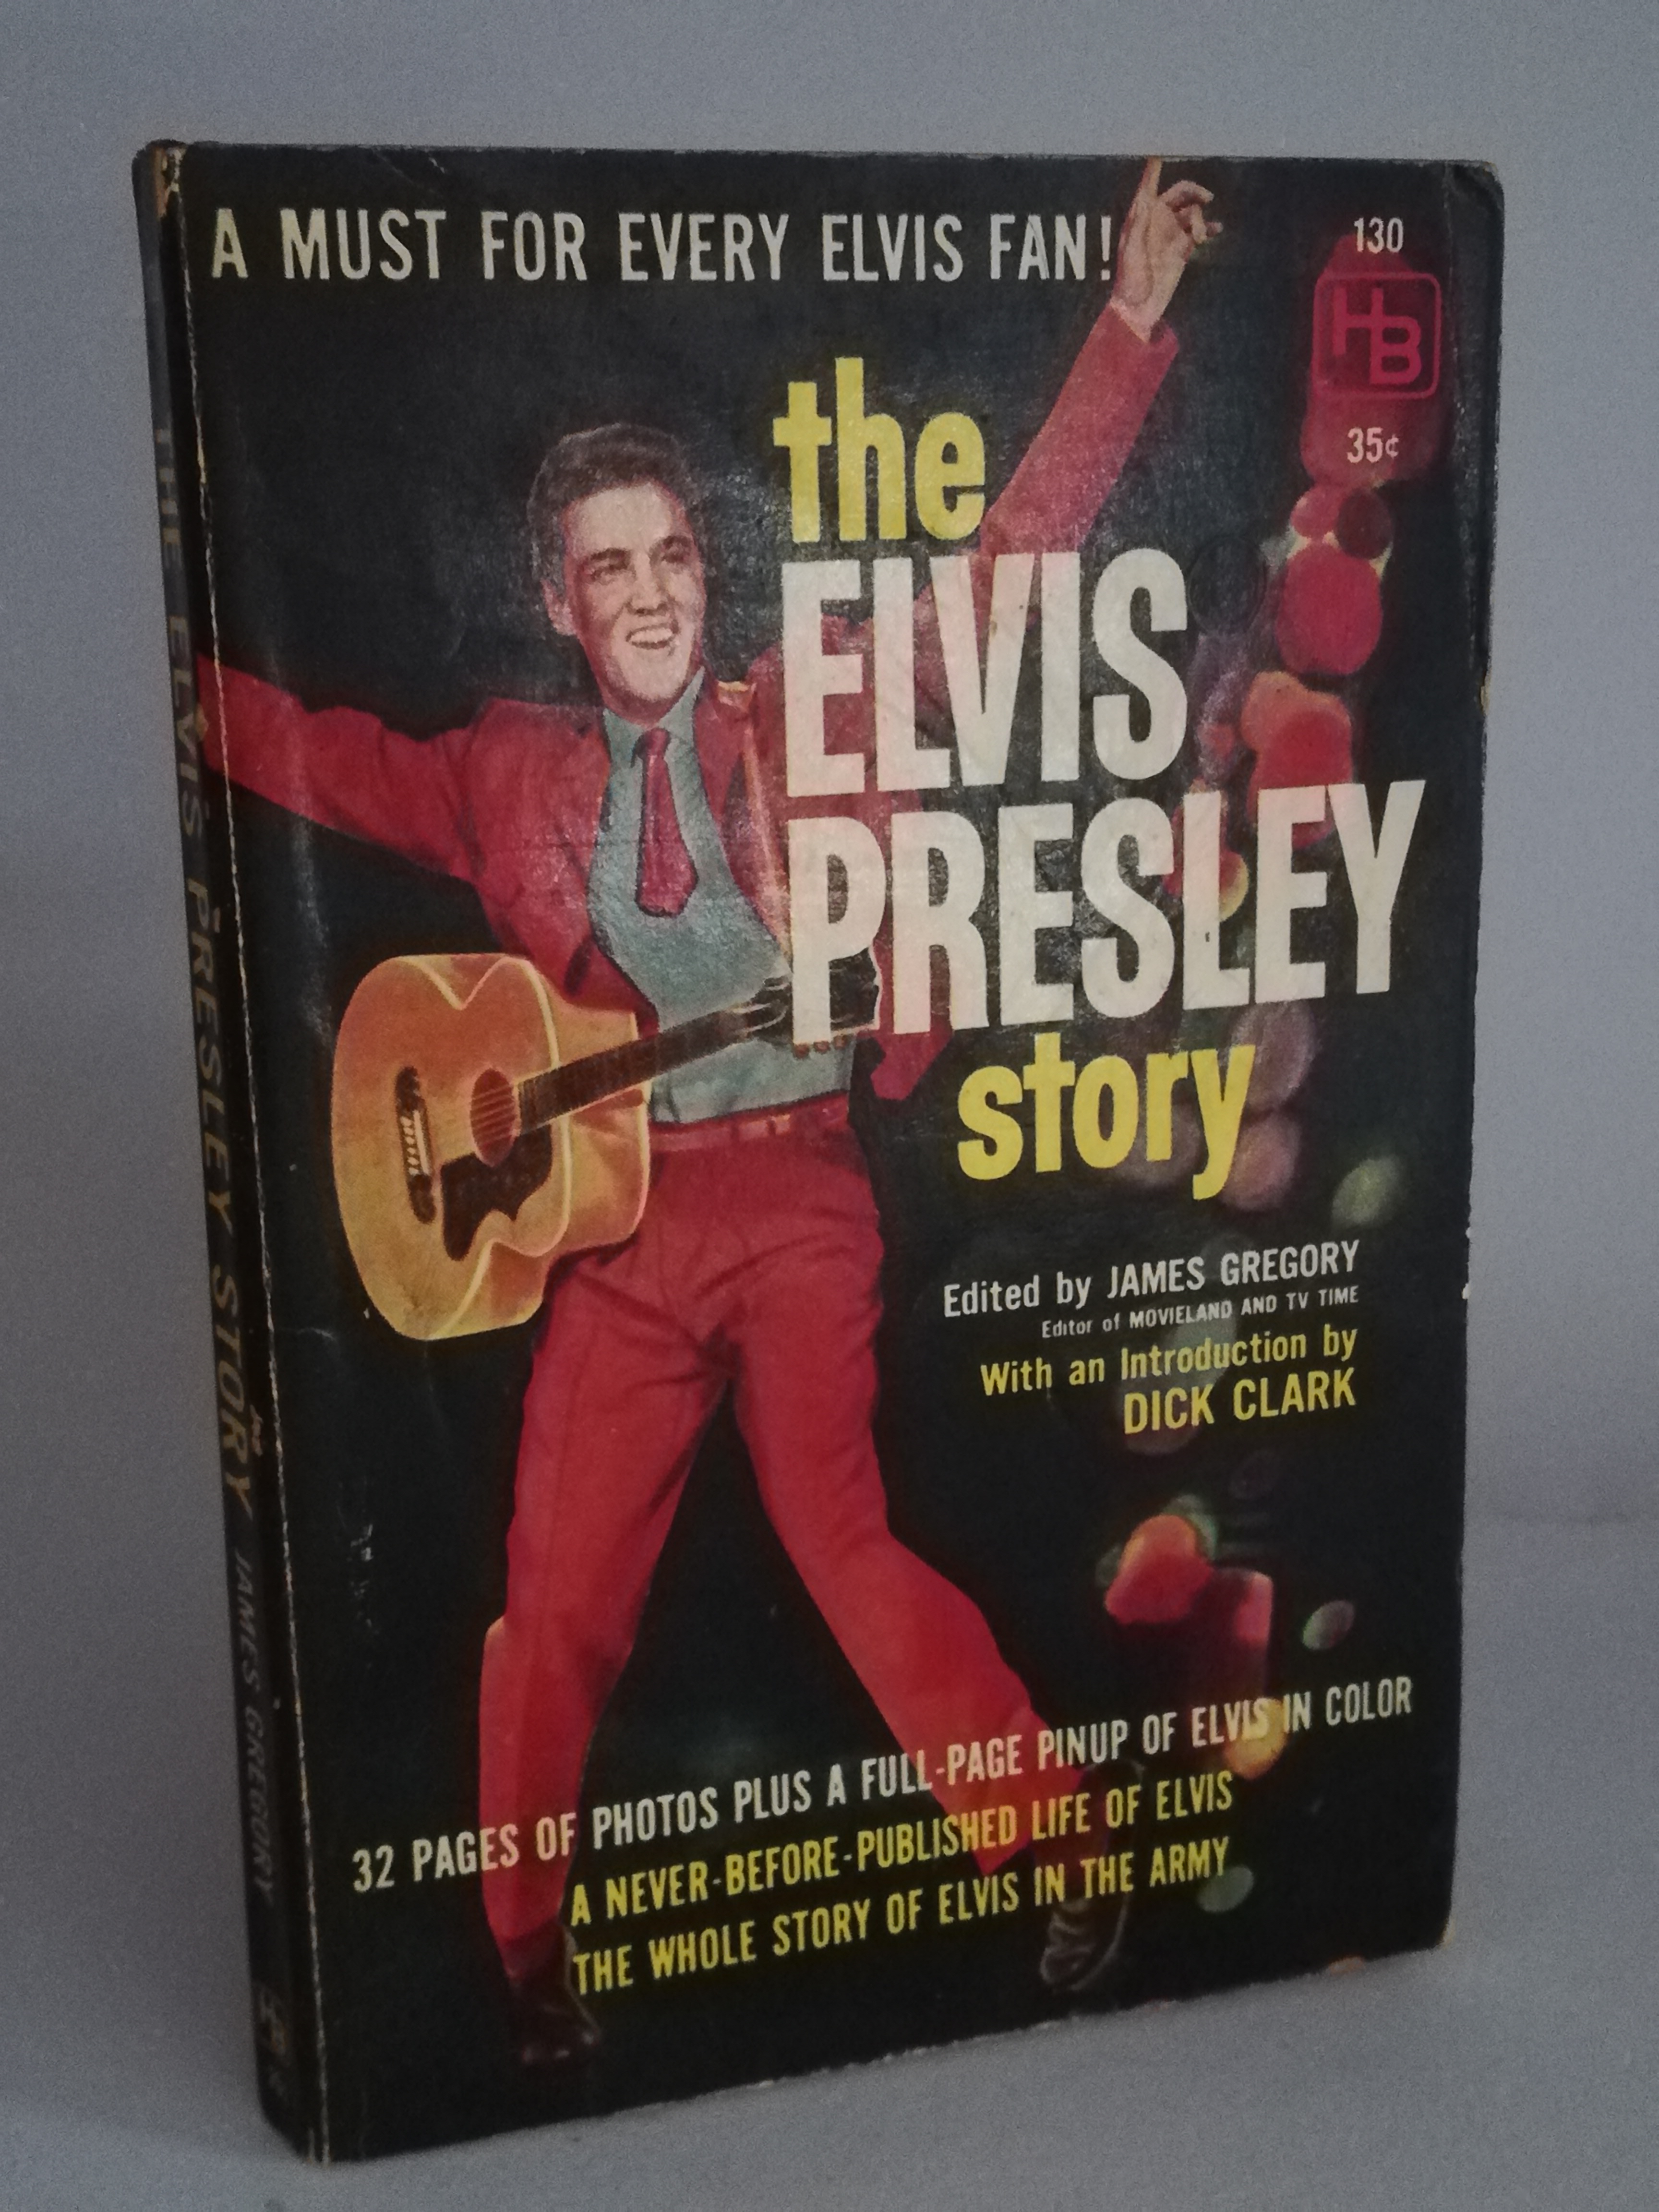 James Gregory  THE ELVIS PRESLEY STORY, Edited by James Gregory.  Introduction by Dick Clark 